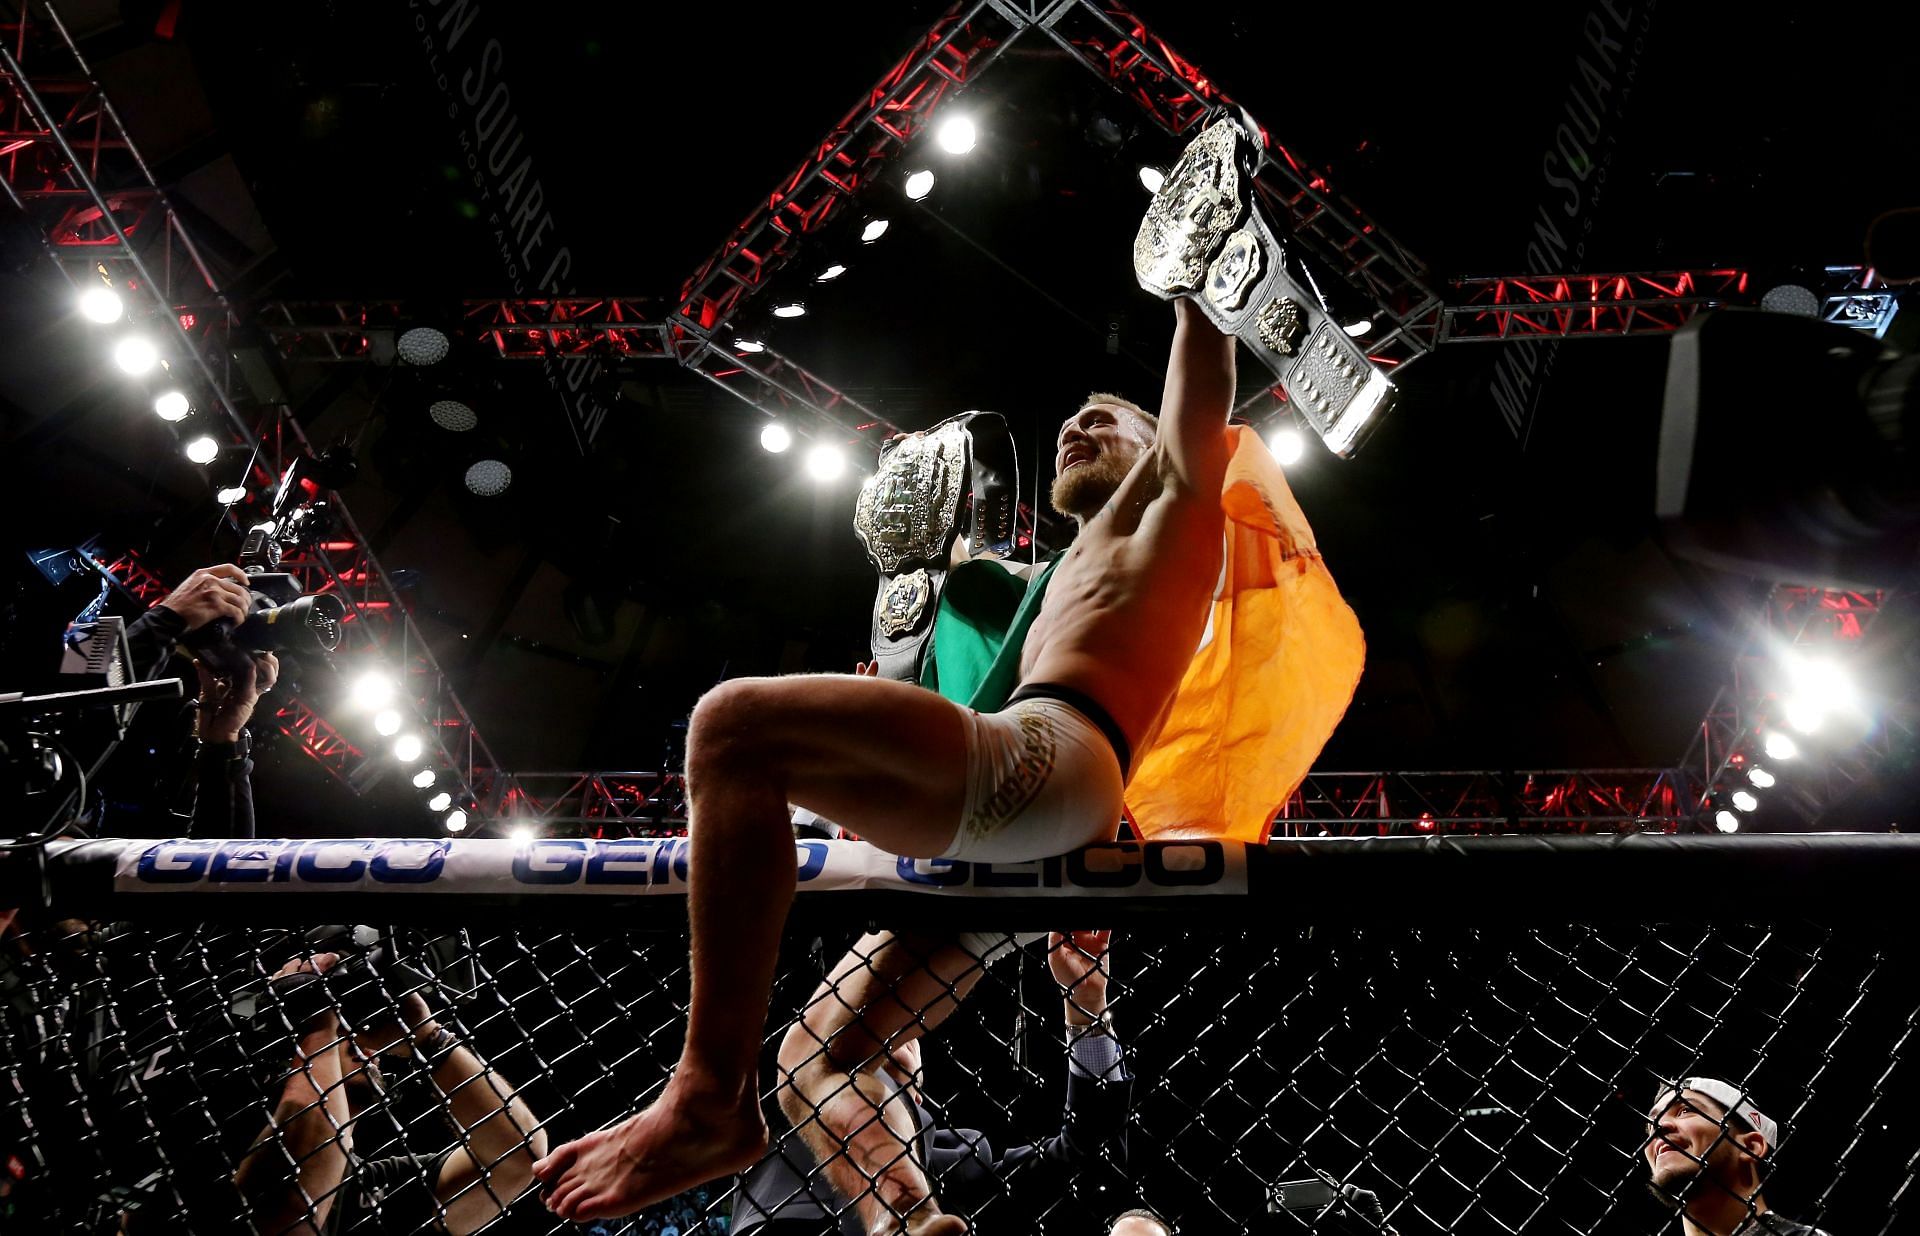 Conor McGregor is still a superstar, but his fall from grace has been a spectacular one